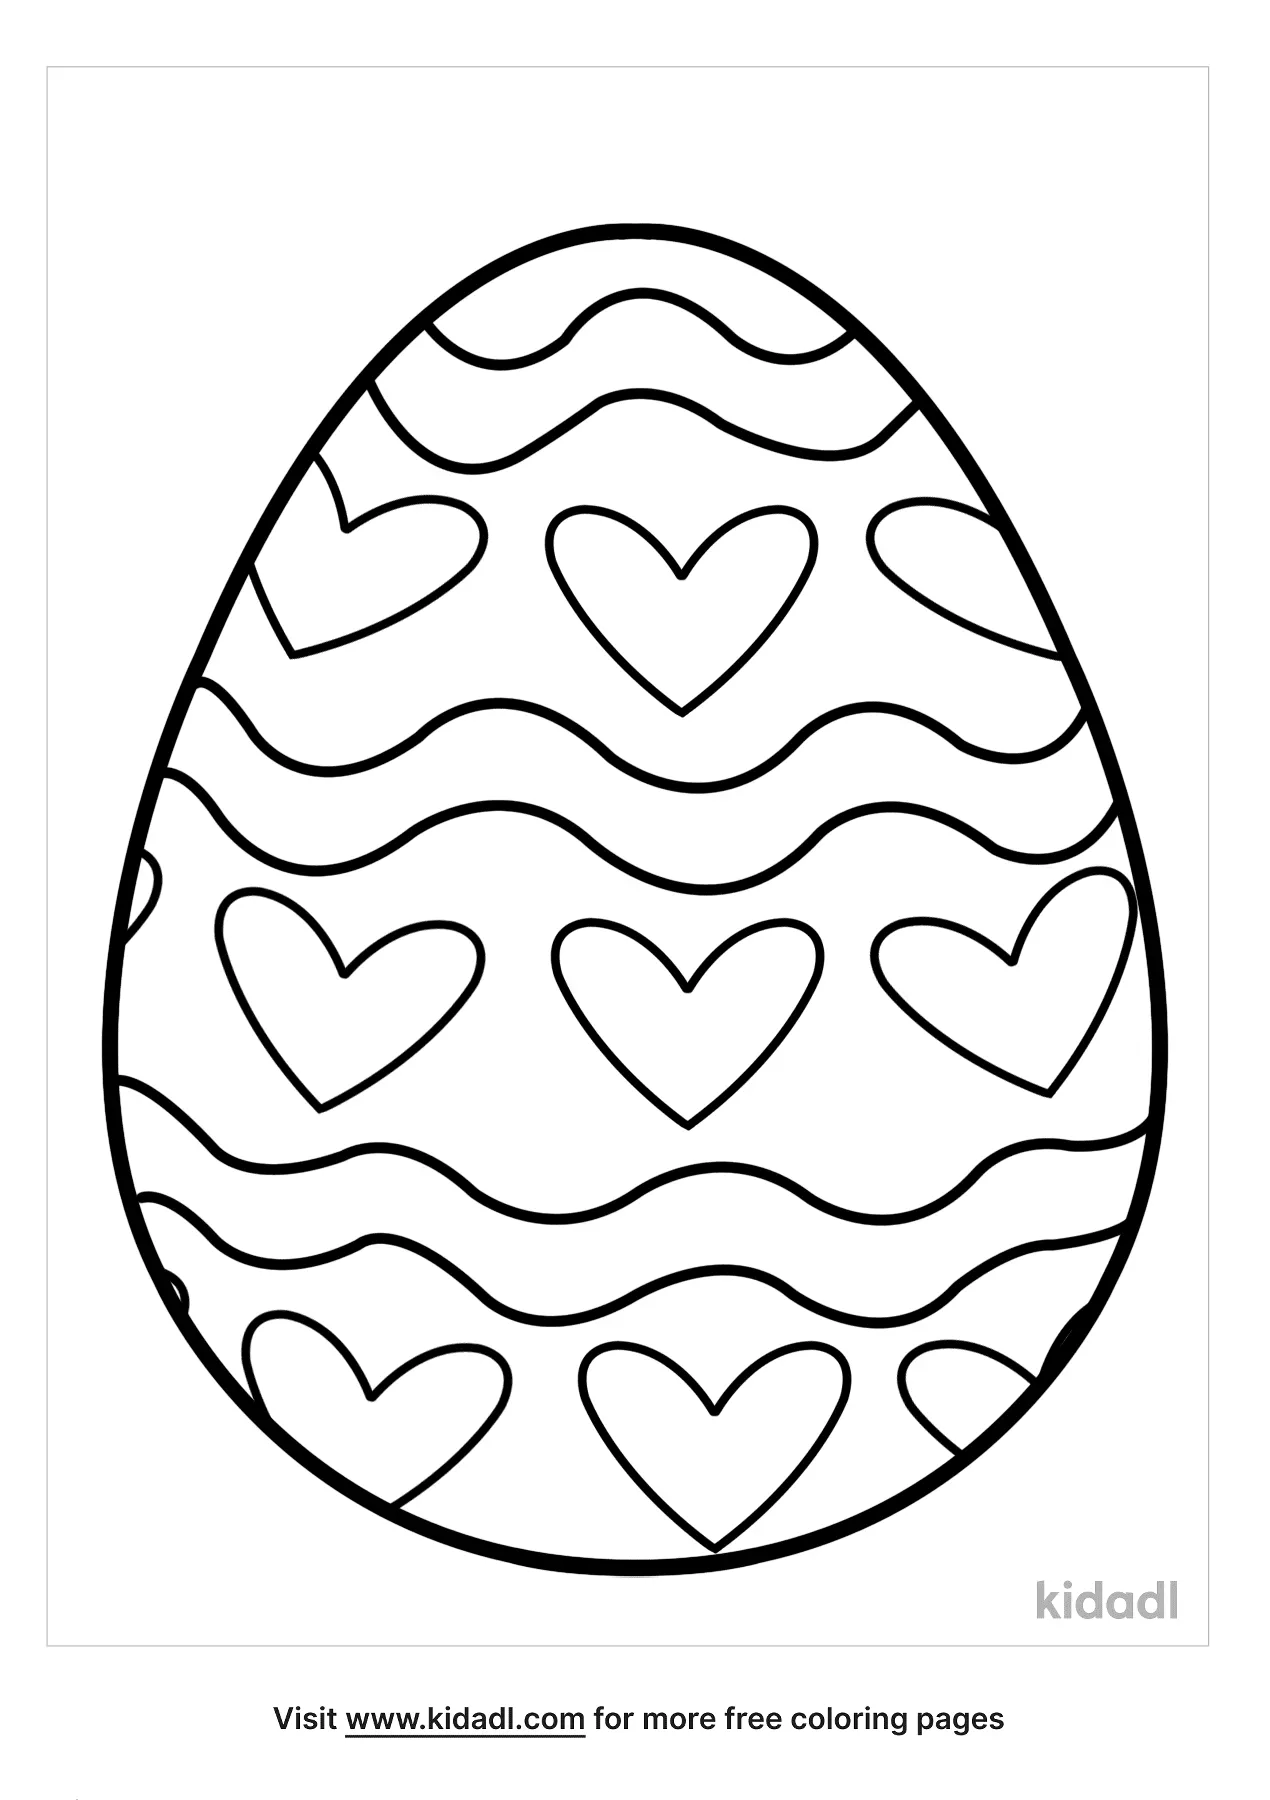 Free Coloring Pages Of Eggs / Easter Eggs Coloring Pages To Print For